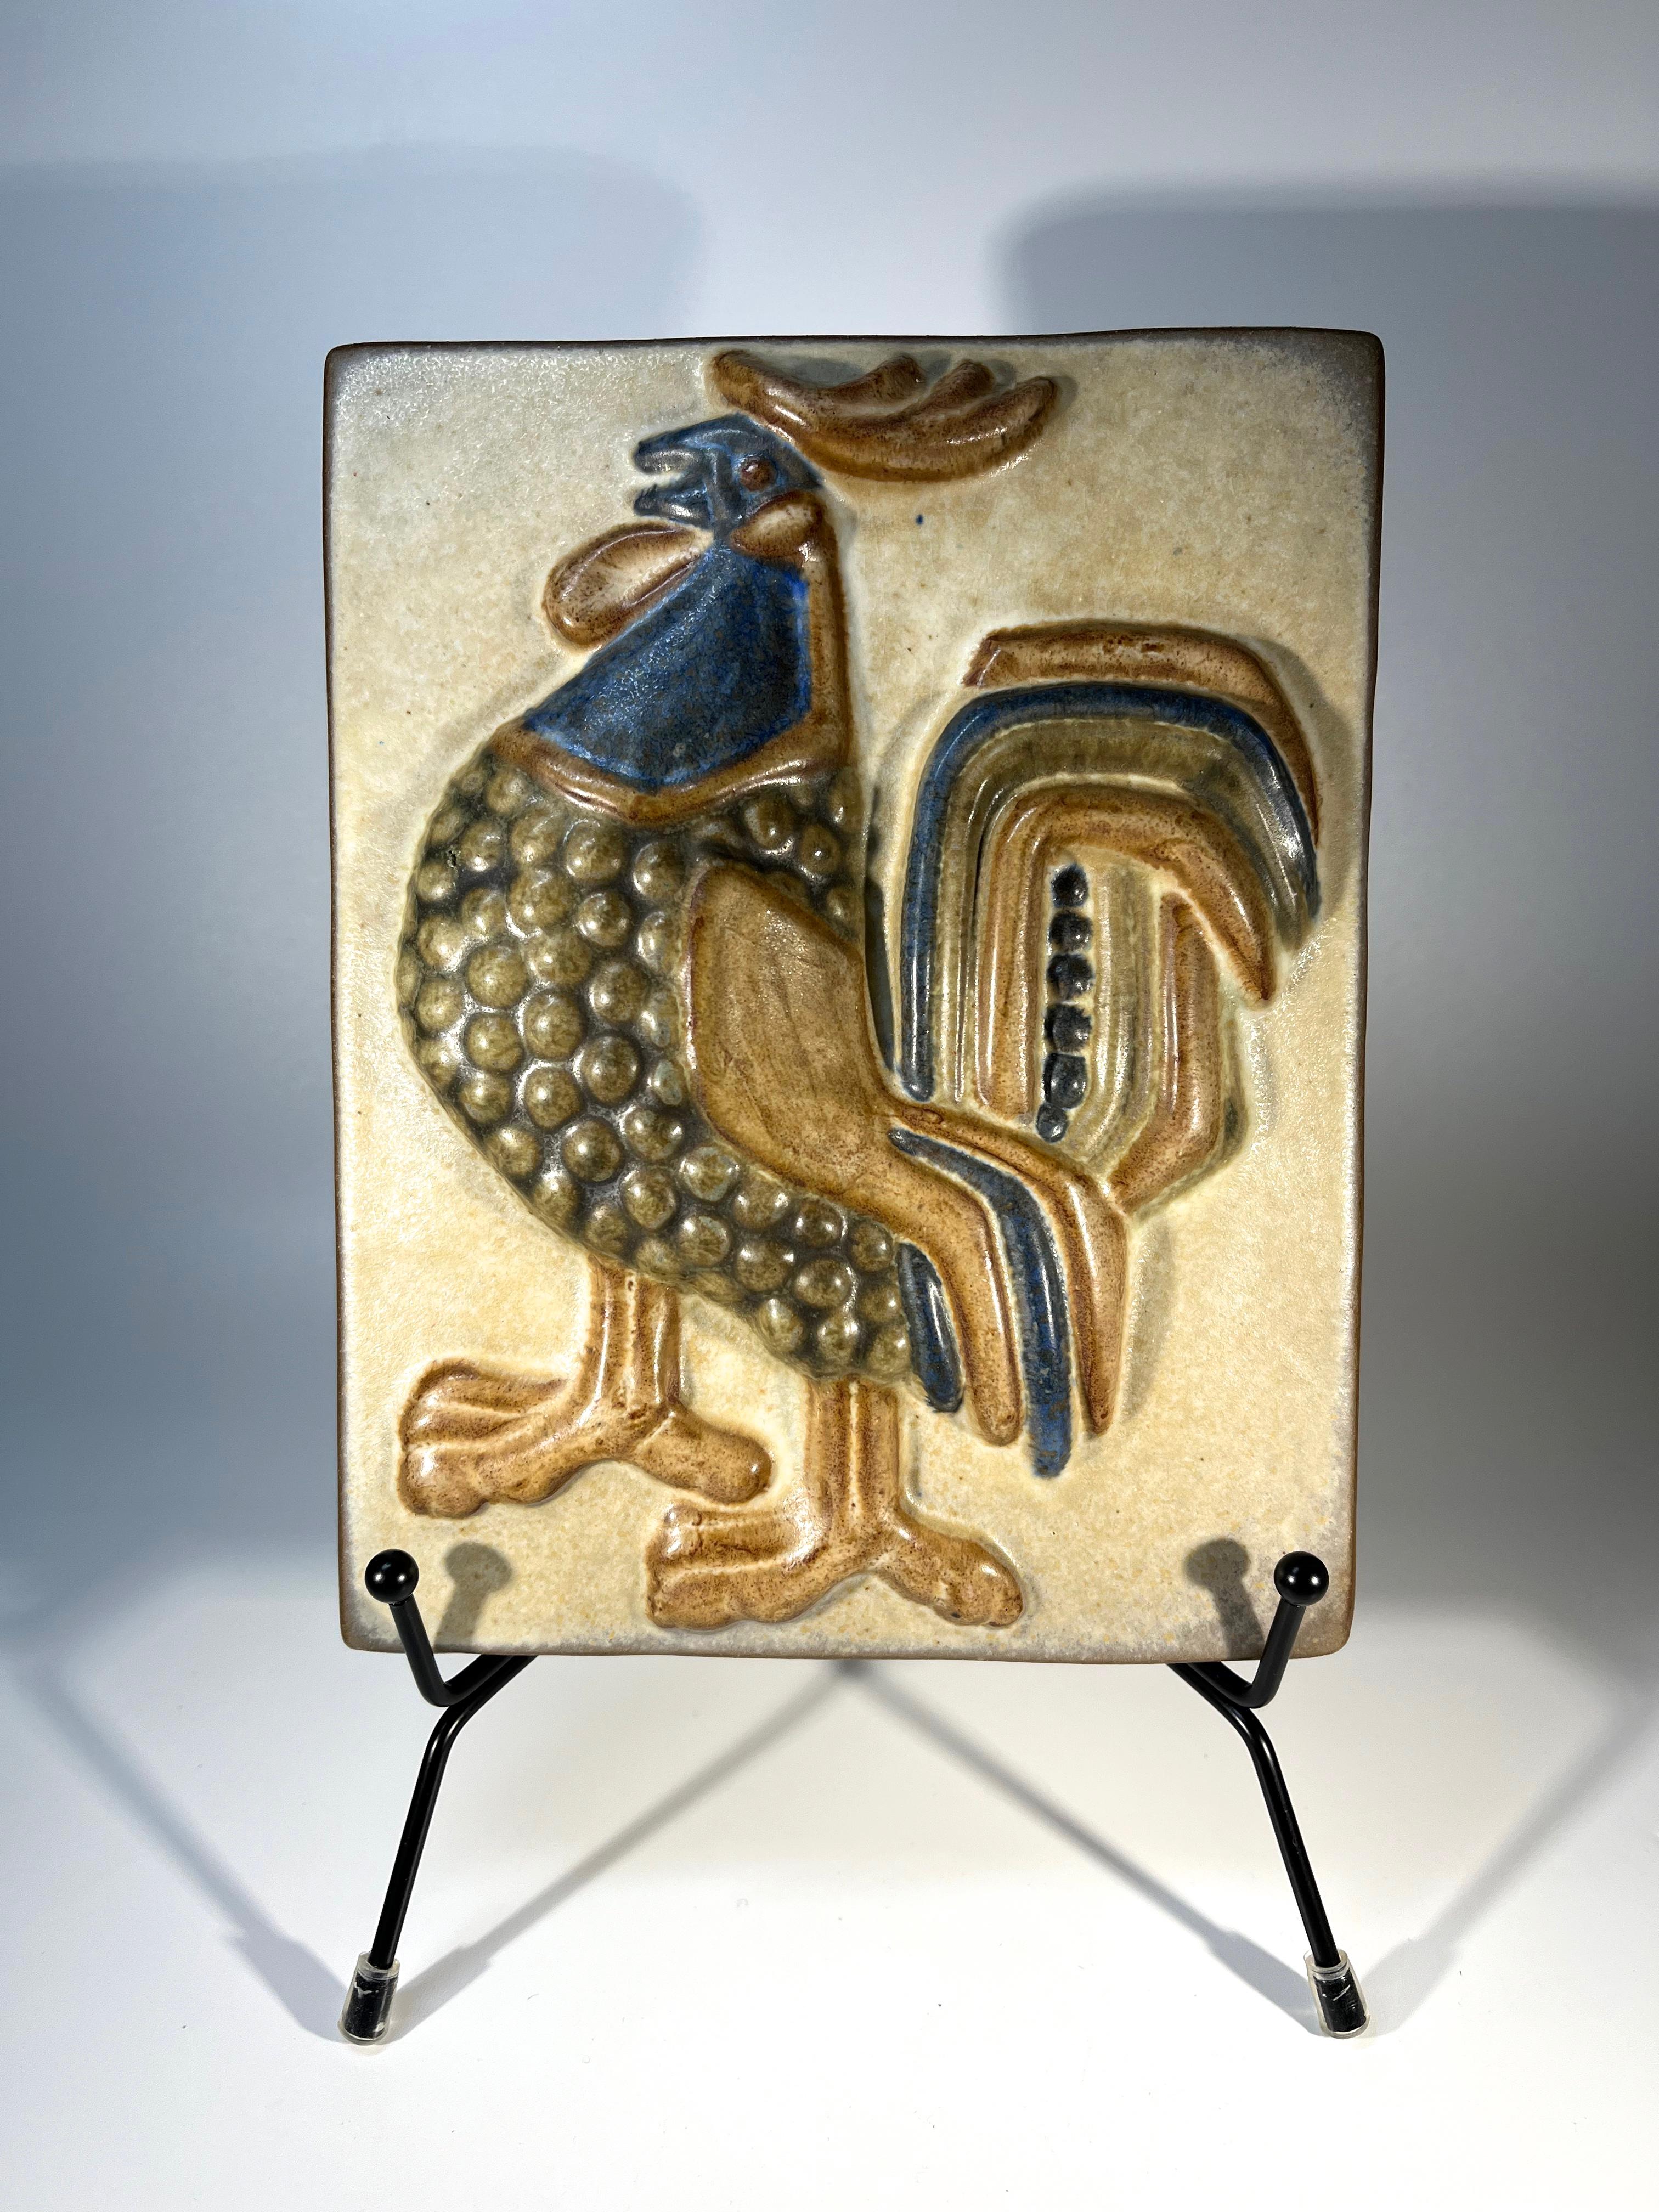 Bold rooster wall plaque by Marianne Starck for Michael Andersen, Denmark 
Wonderfully hand crafted by the renowned Danish ceramicist
Stamped MS, Three Herrings mark, and #6071 on reverse
Width 5.5inch, Height 7 inch, Depth 1 inch
Weight 1lb 7oz
In